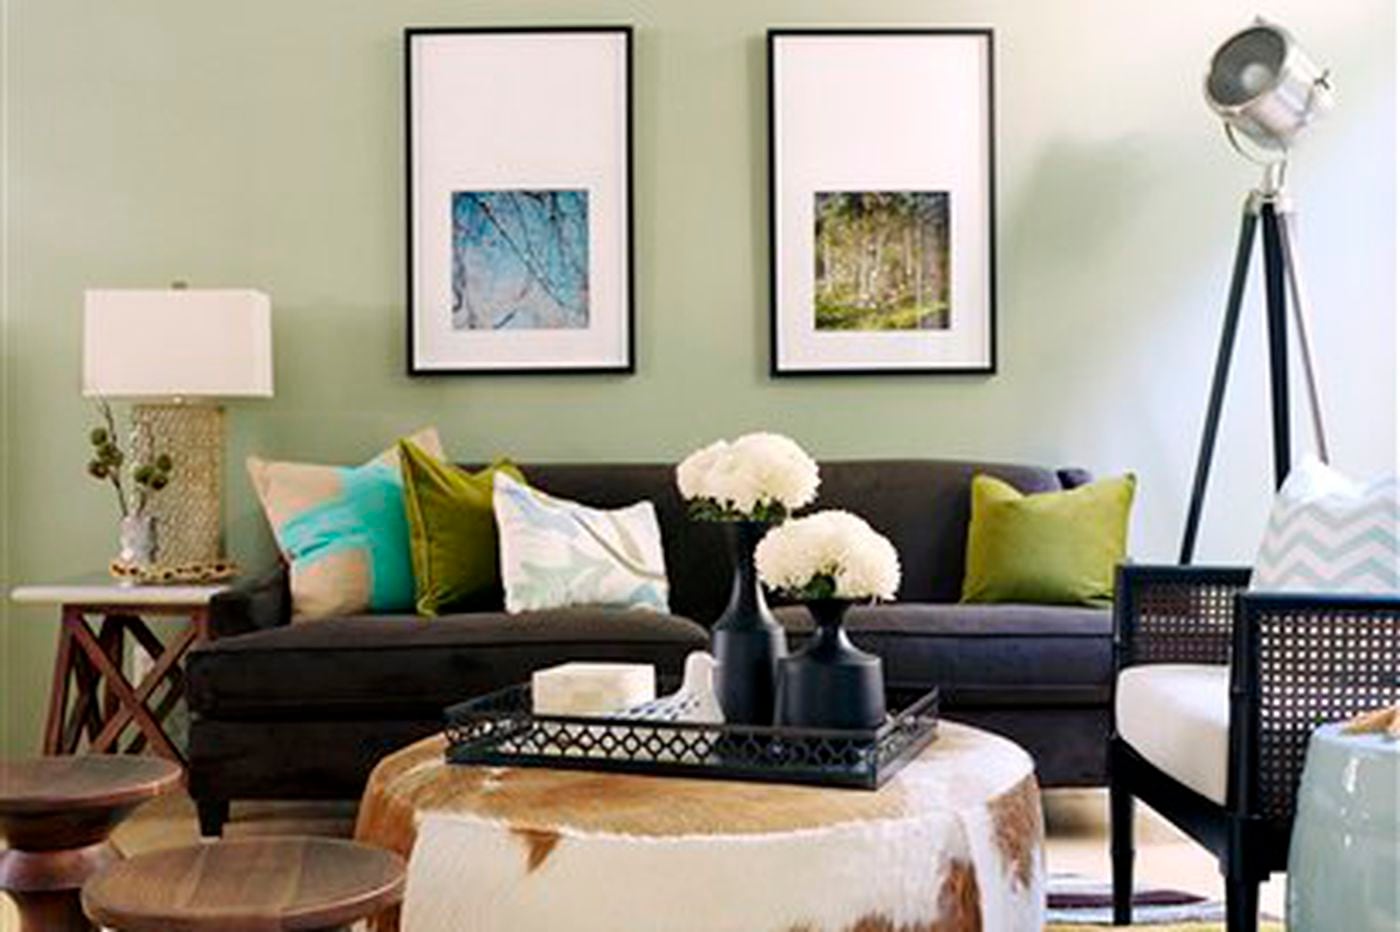 Ask Jennifer Adams Is A Sofa Or A Sectional Better For A Small Living Room